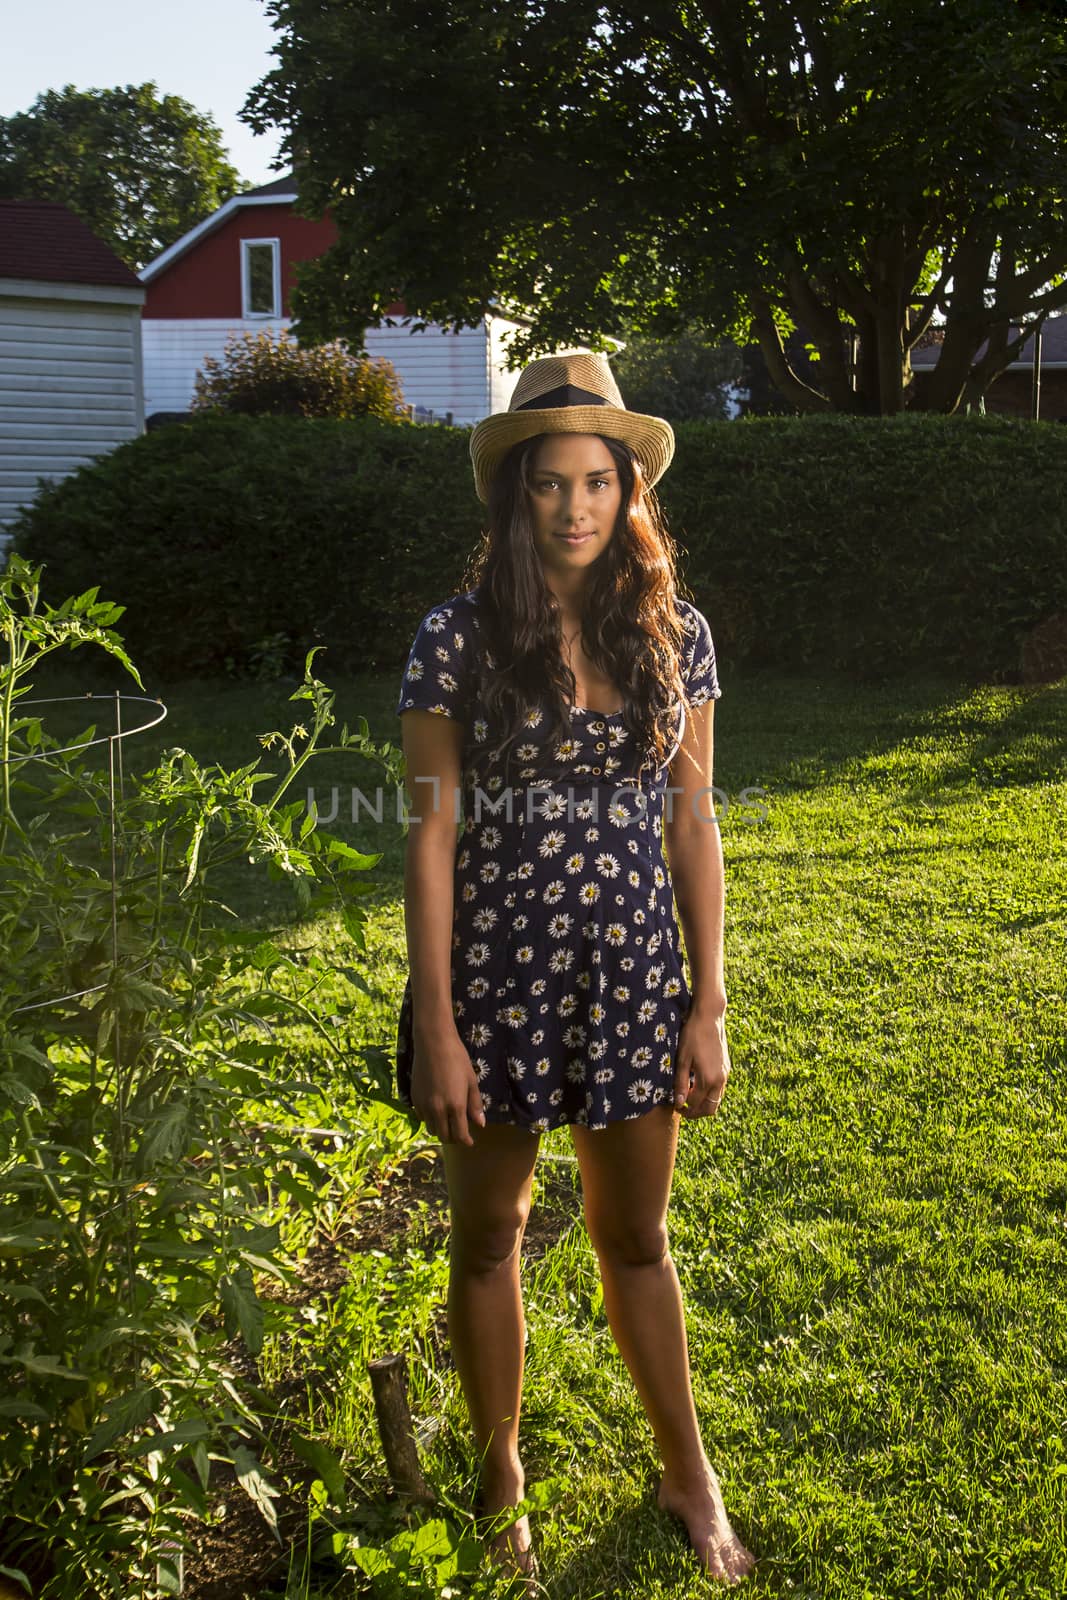 twenty something woman standing outside in the sun, wearing a sun dress and a straw hat